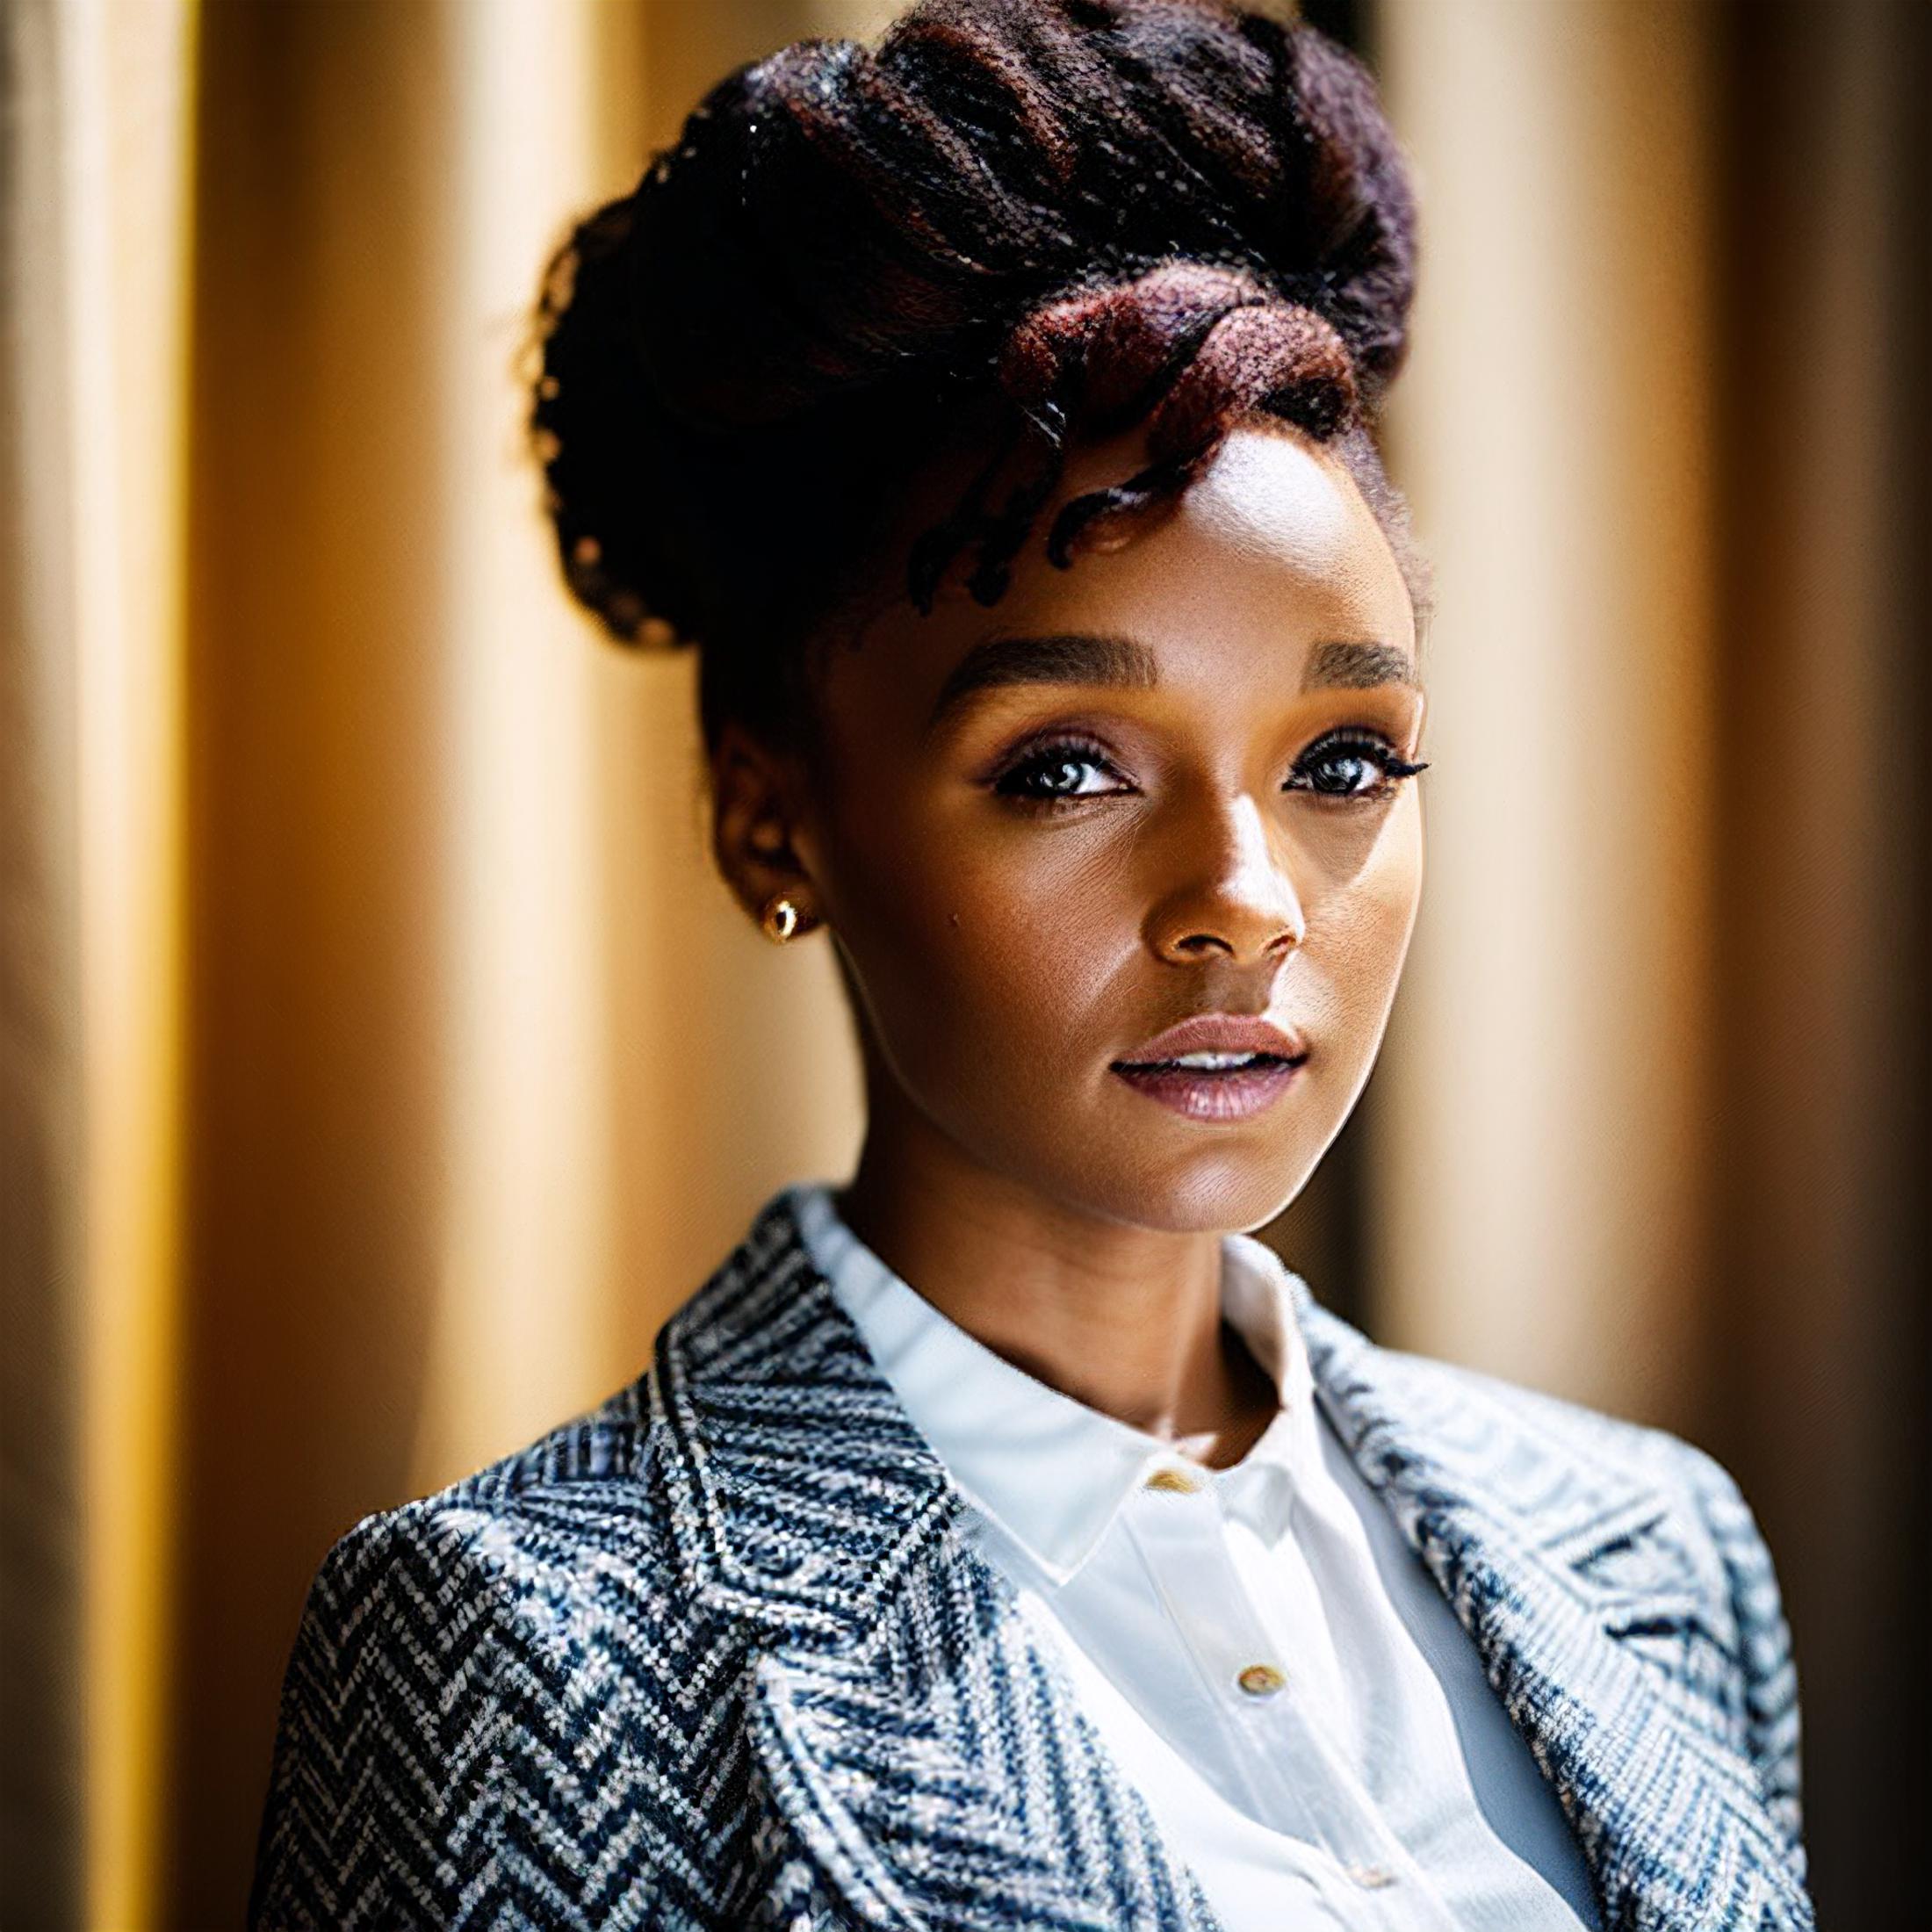 Janelle Monae (Musician/Actor) image by Smoke_Room